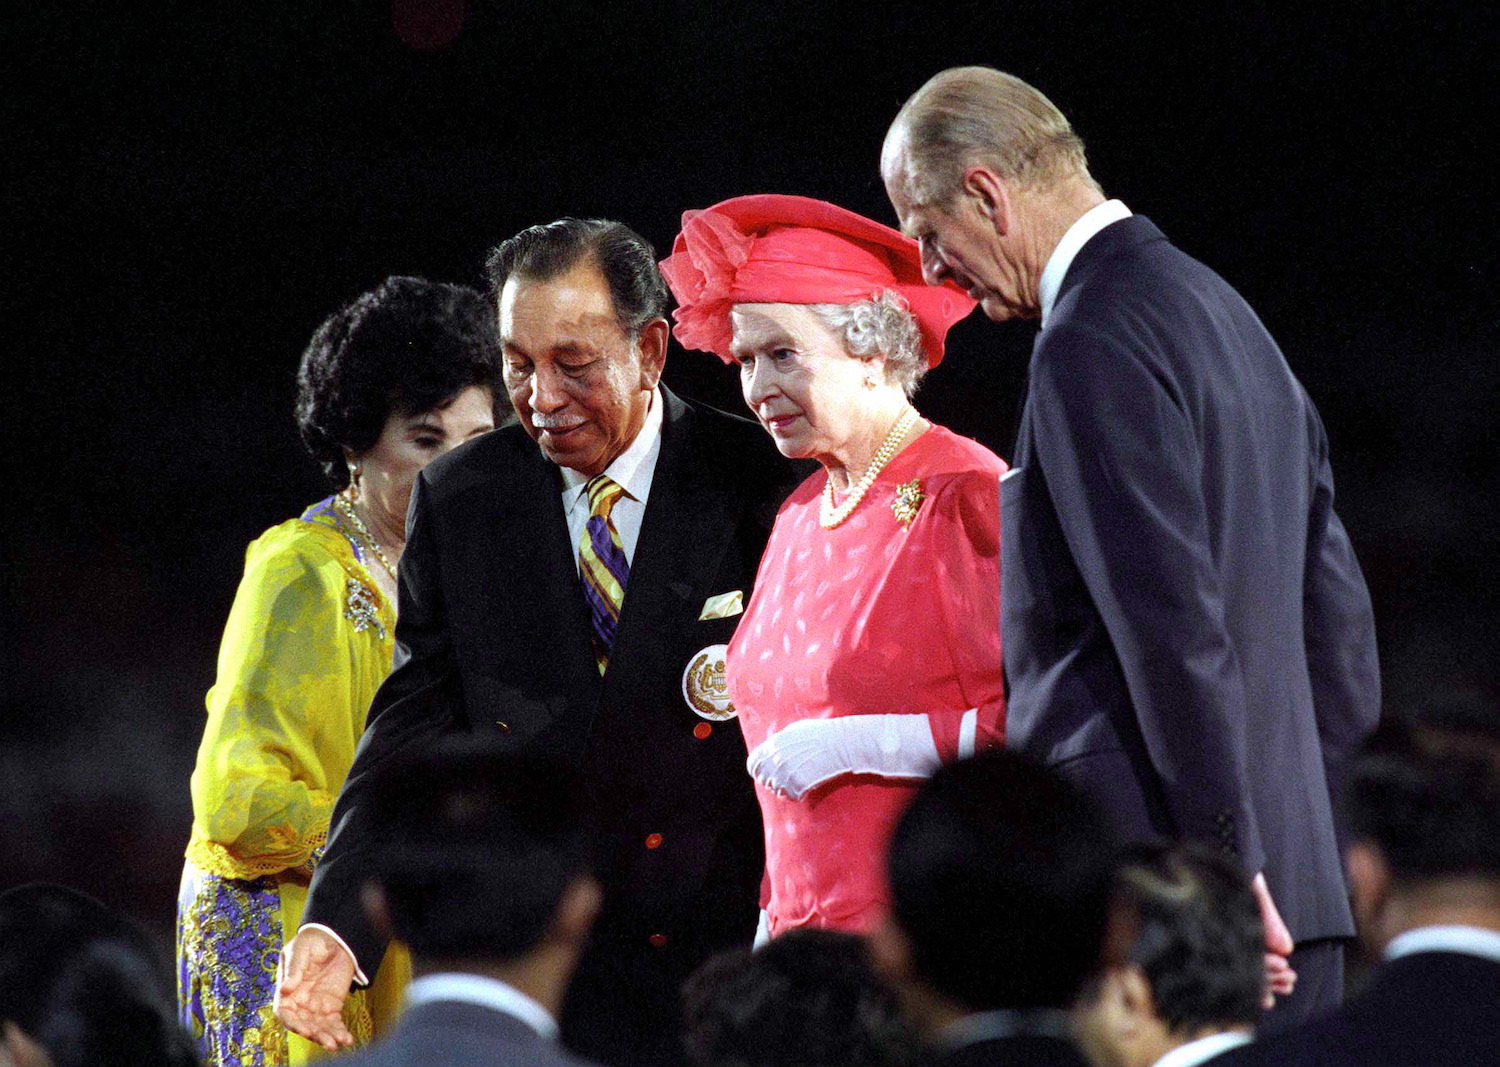 Queen Elizabeth II and Prince Philip attend the Commonwealth Games closing ceremony